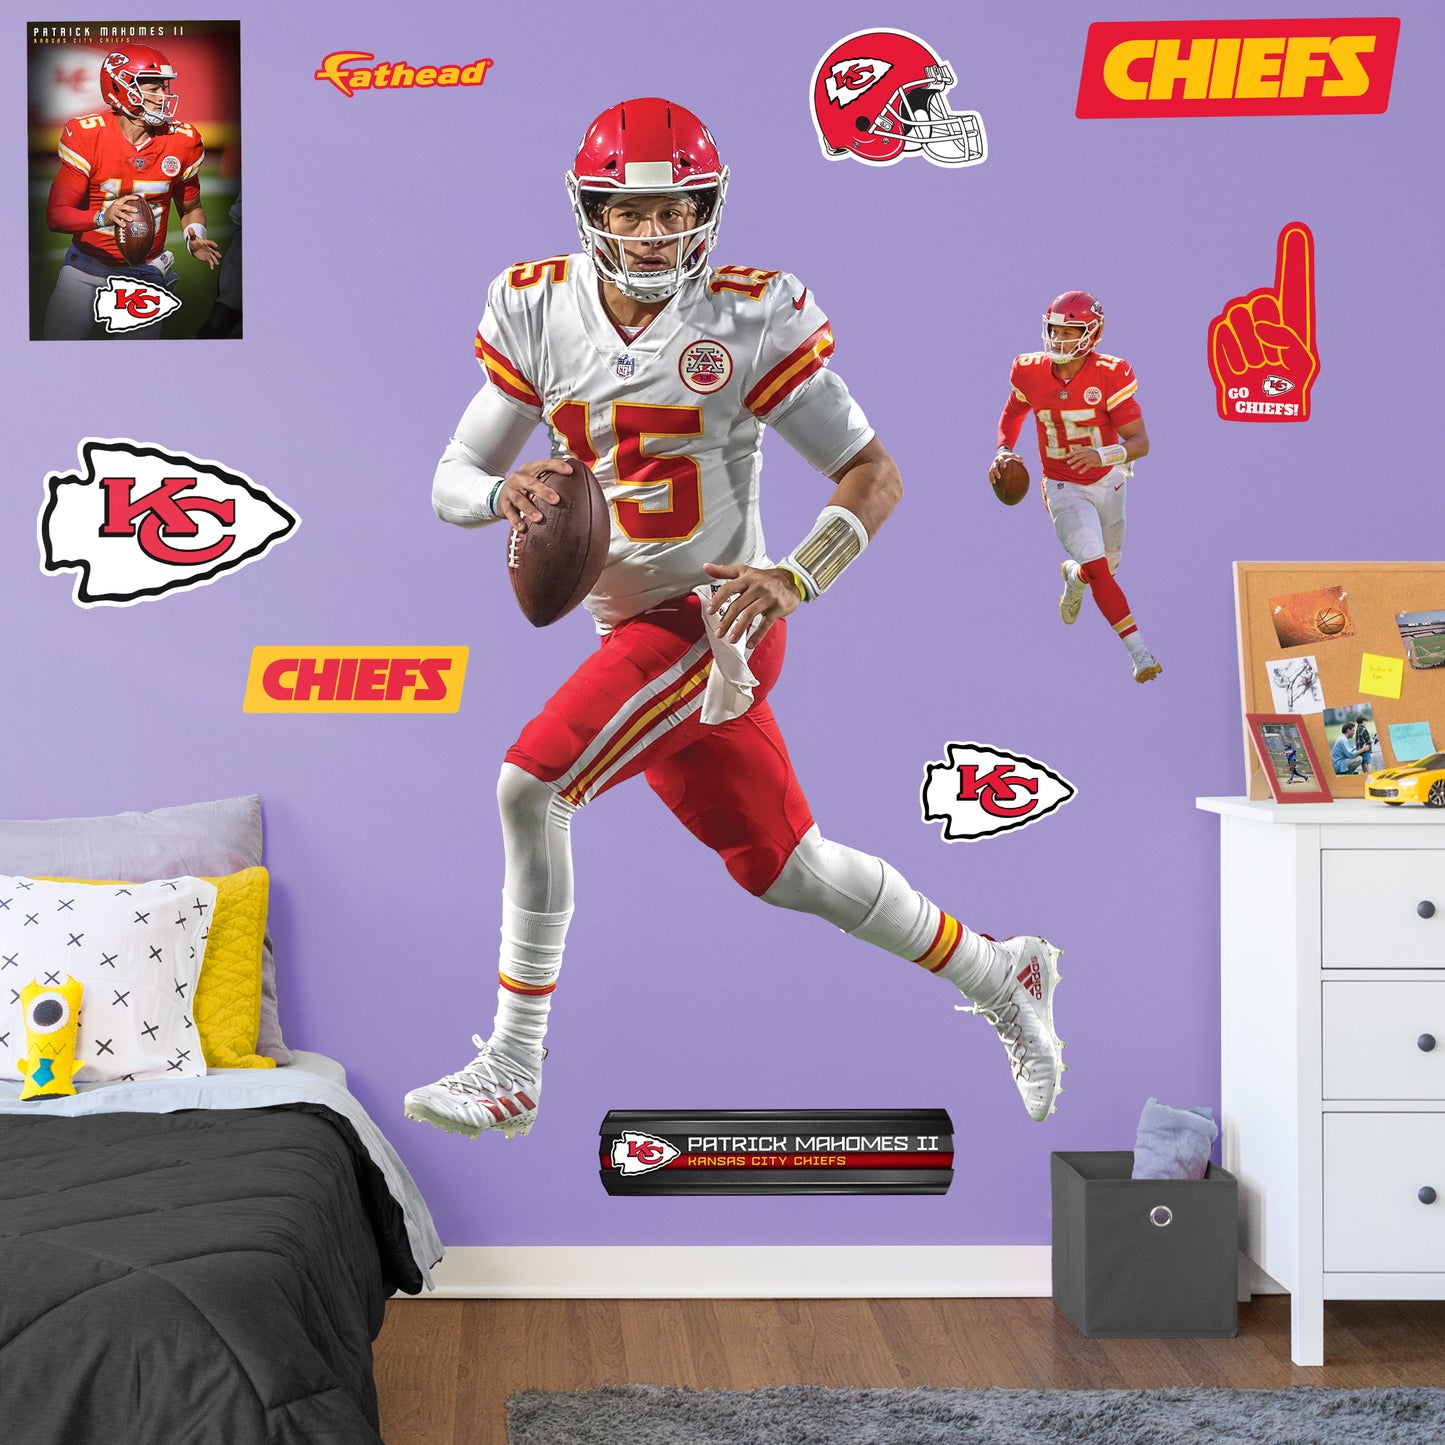 Life-Size Athlete + 10 Decals (47"W x 74"H) Bring the action of the NFL into your home with a wall decal of Patrick Mahomes! High quality, durable, and tear resistant, you'll be able to stick and move it as many times as you want to create the ultimate football experience in any room!